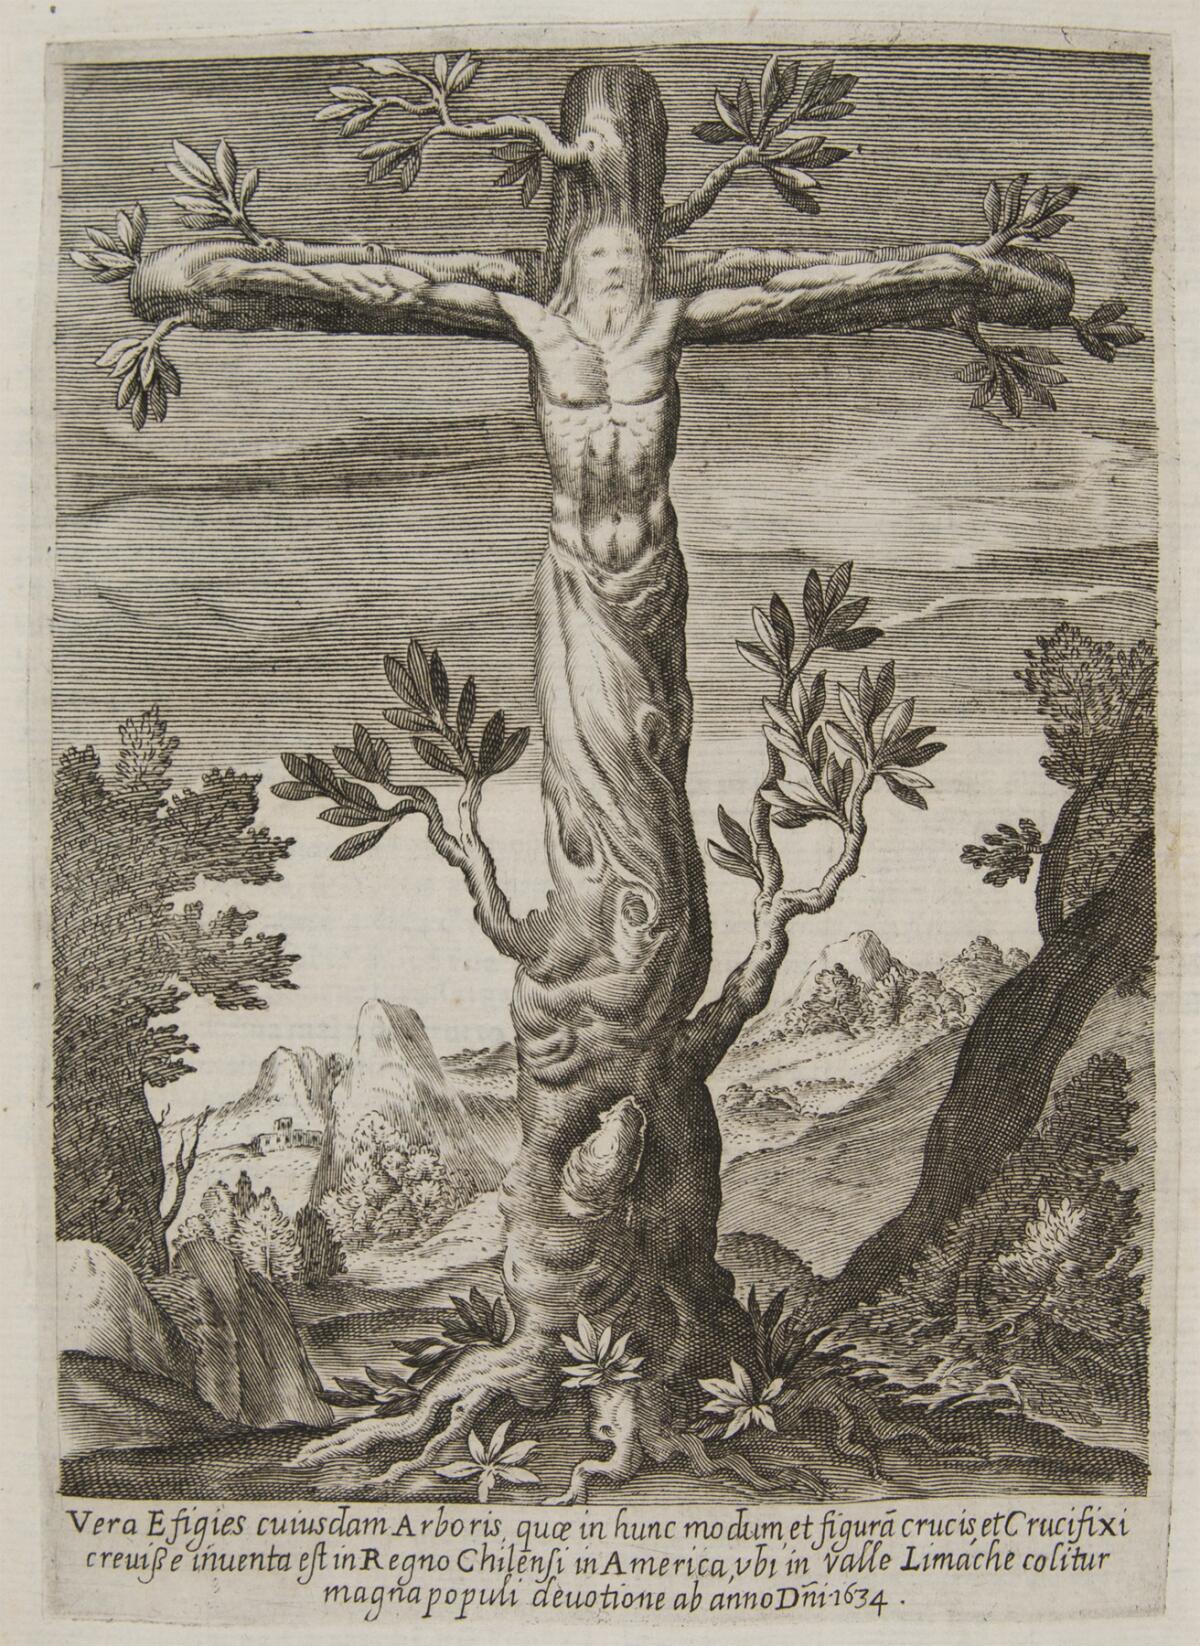 A tree in the shape of a crucifix features an image of Christ, as depicted by Alonso de Ovalle in "An Historical Relation of the Kingdom of Chile," 1646.